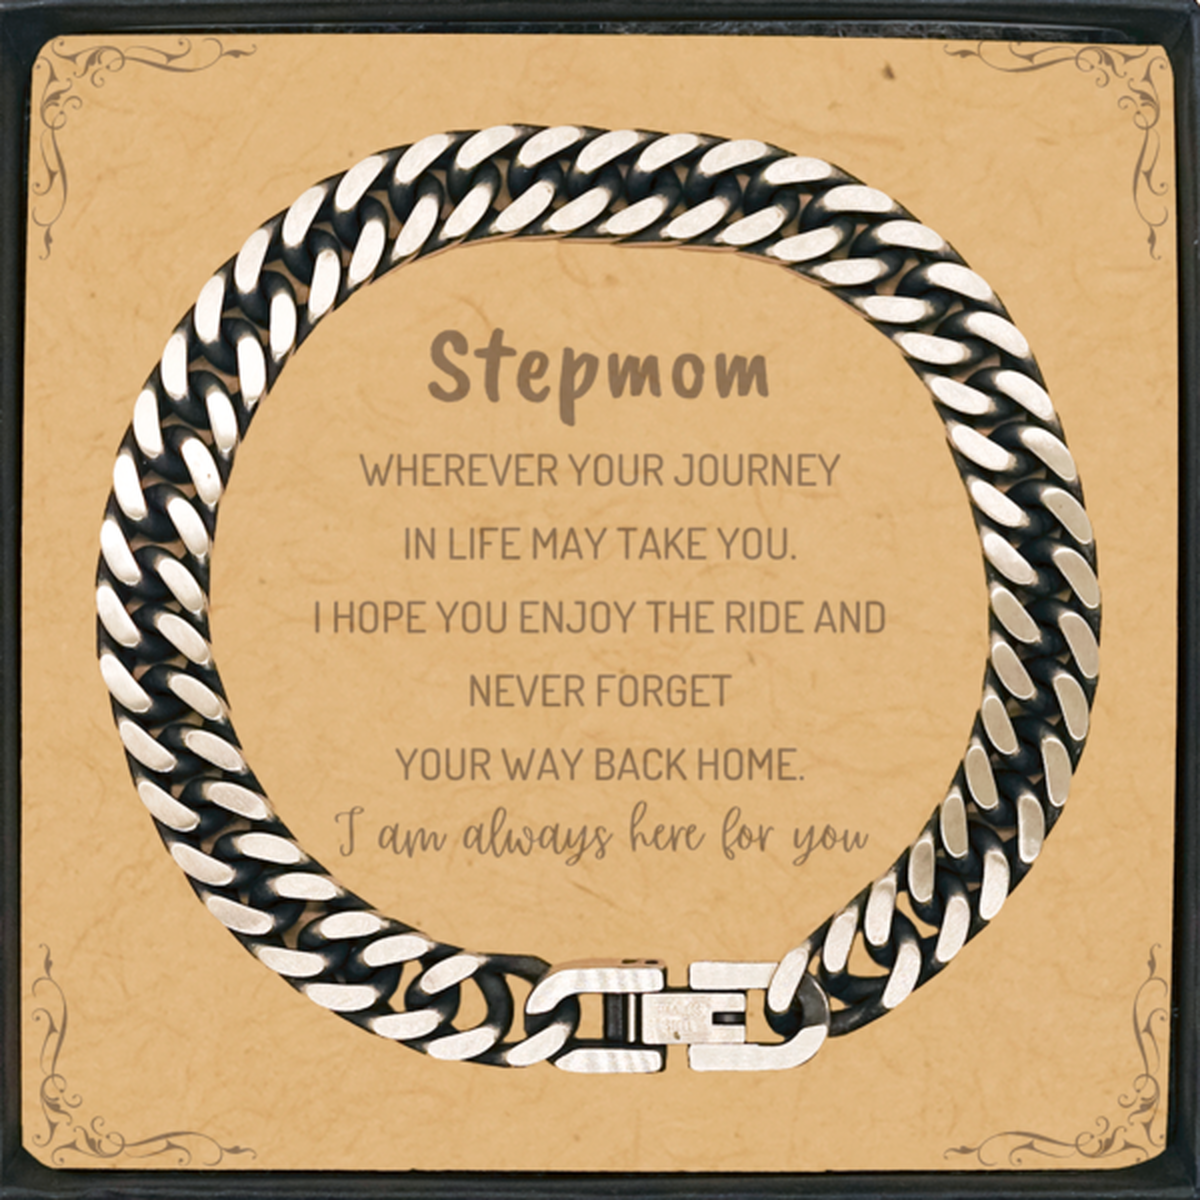 Stepmom wherever your journey in life may take you, I am always here for you Stepmom Cuban Link Chain Bracelet, Awesome Christmas Gifts For Stepmom Message Card, Stepmom Birthday Gifts for Men Women Family Loved One